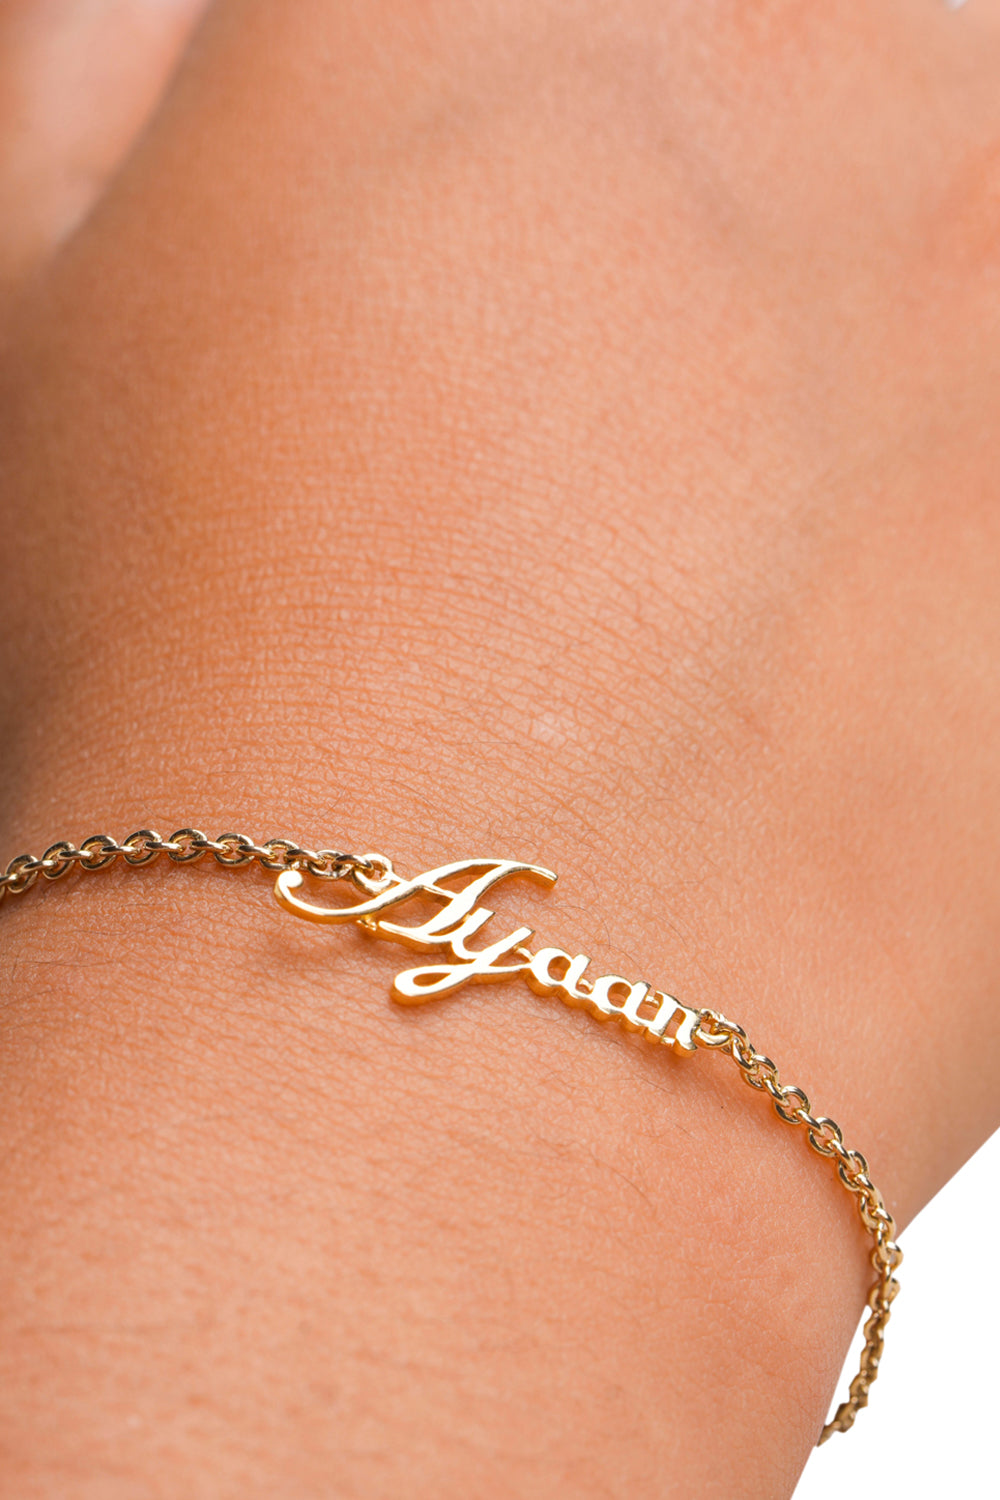 Baby Personalised Name Chain 14KT Gold Bracelet